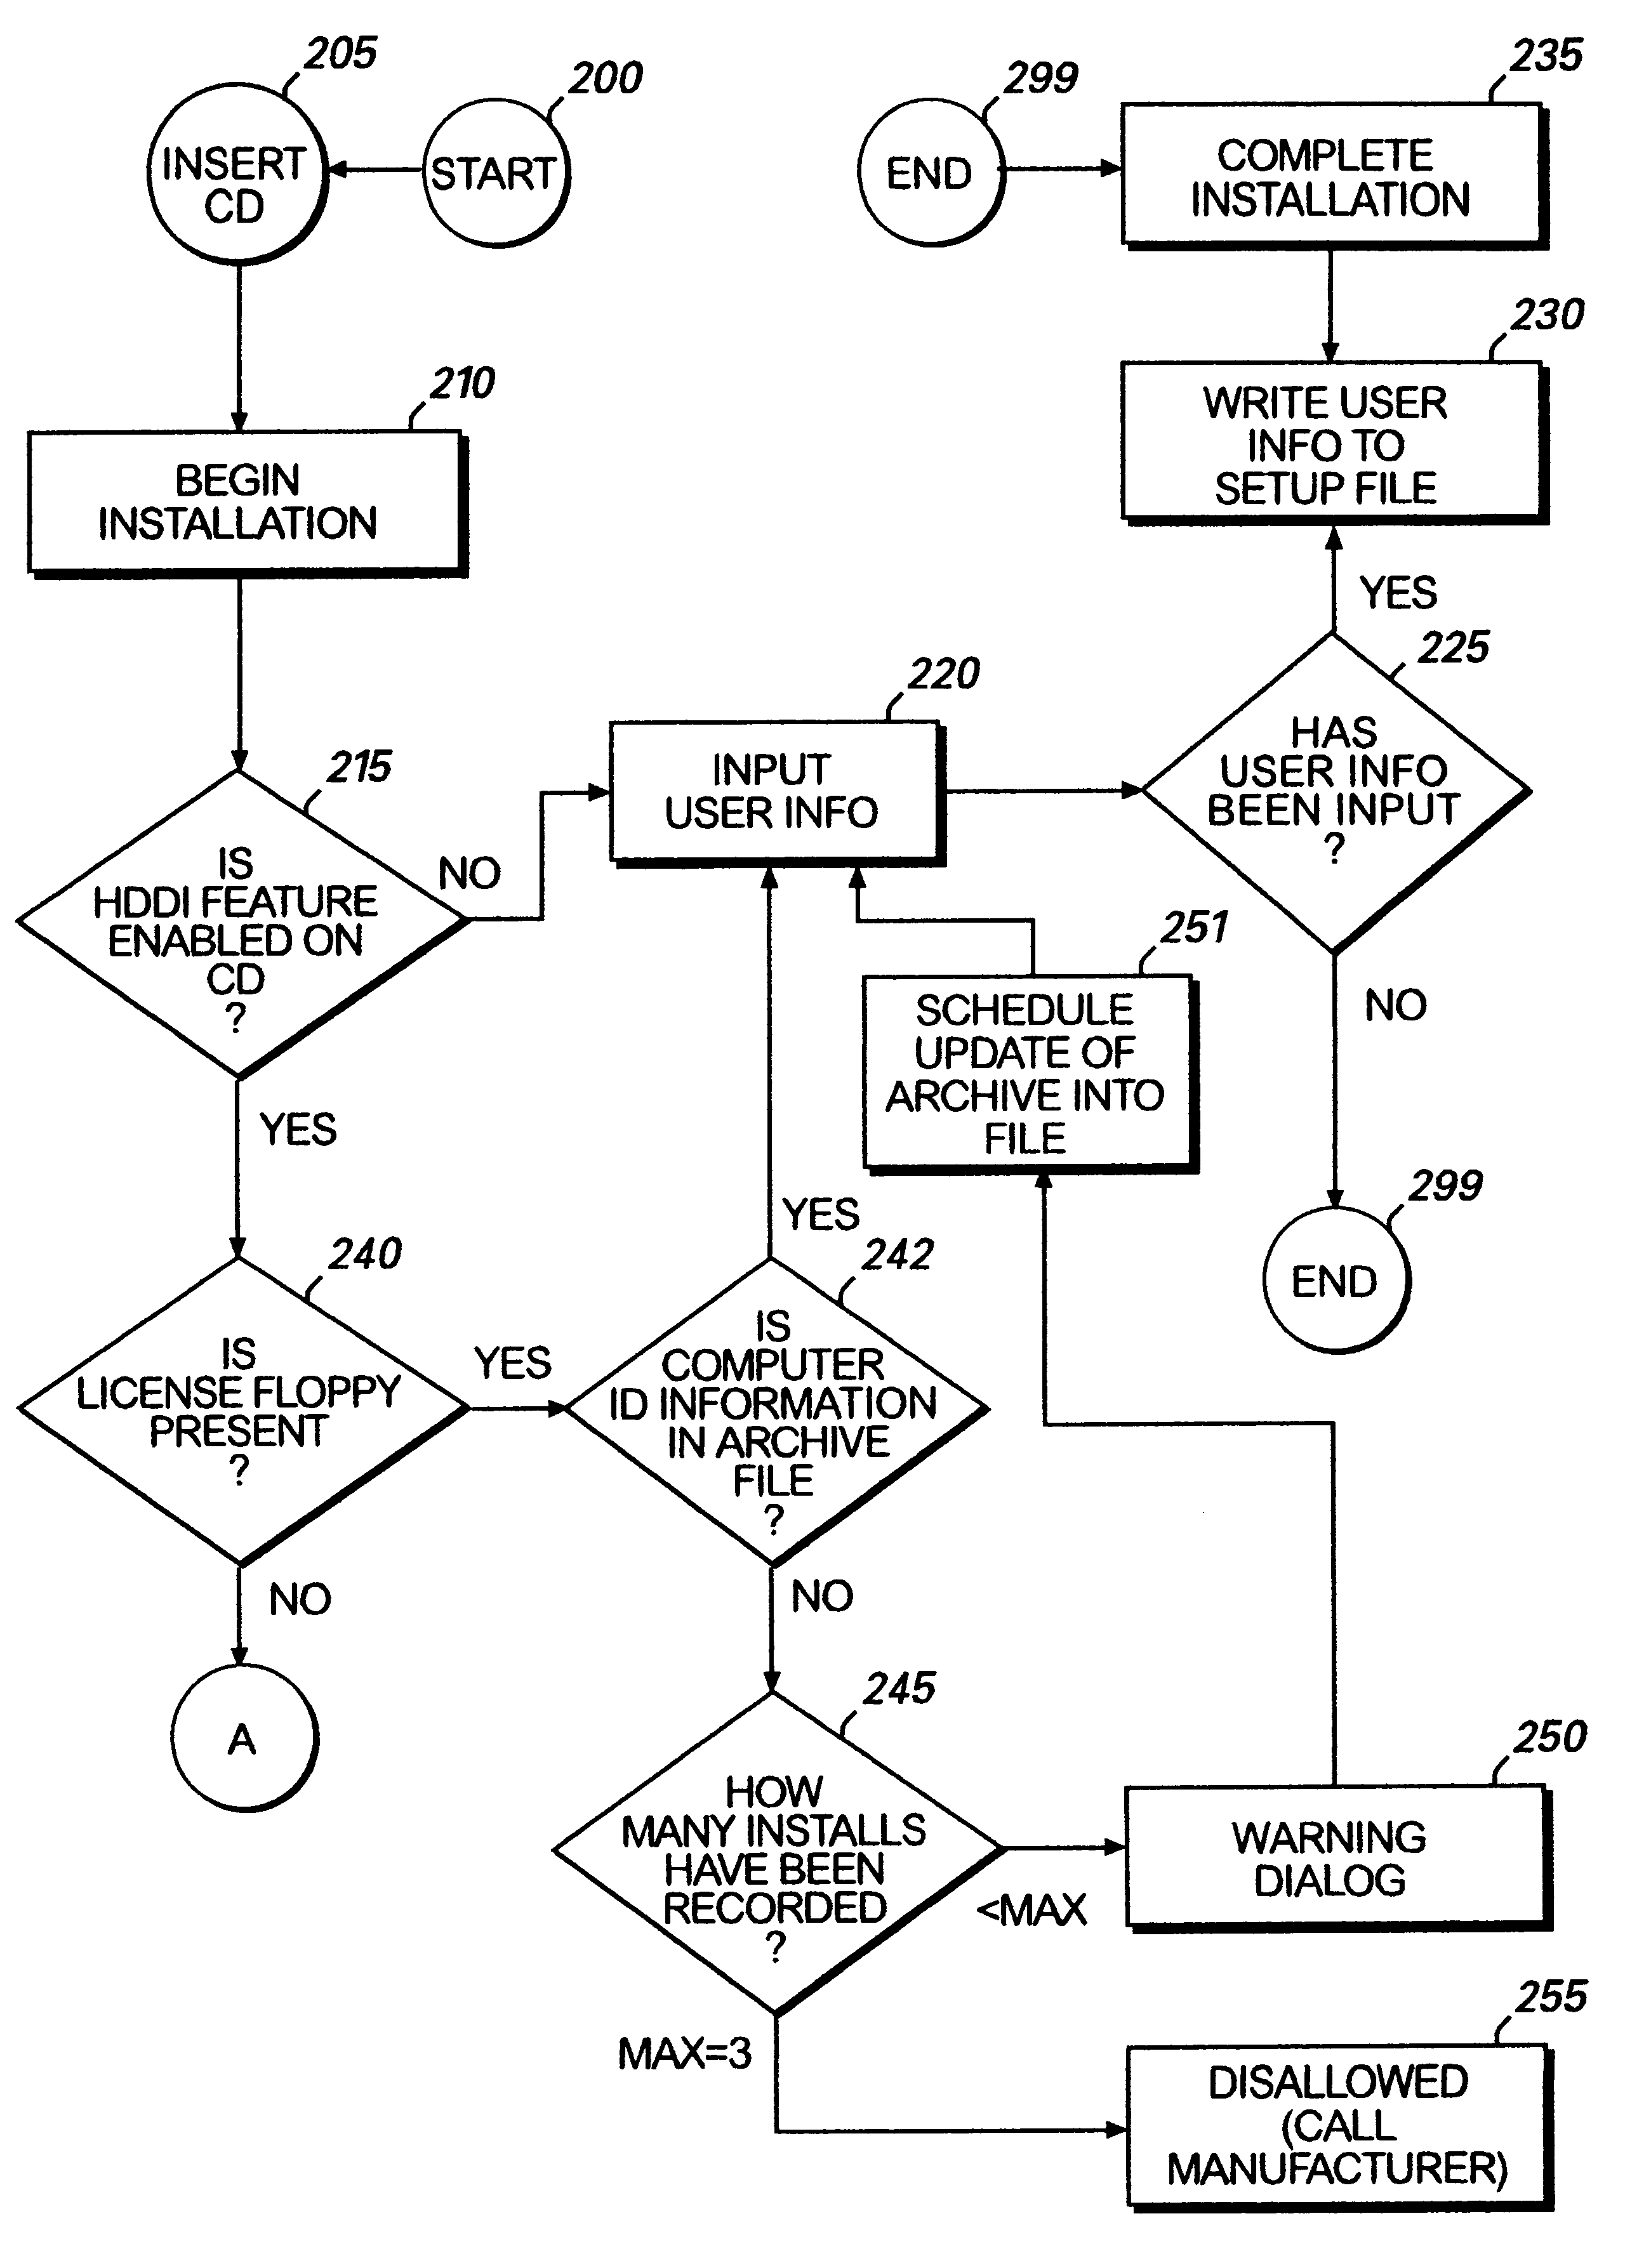 Method for preventing software piracy during installation from a read only storage medium